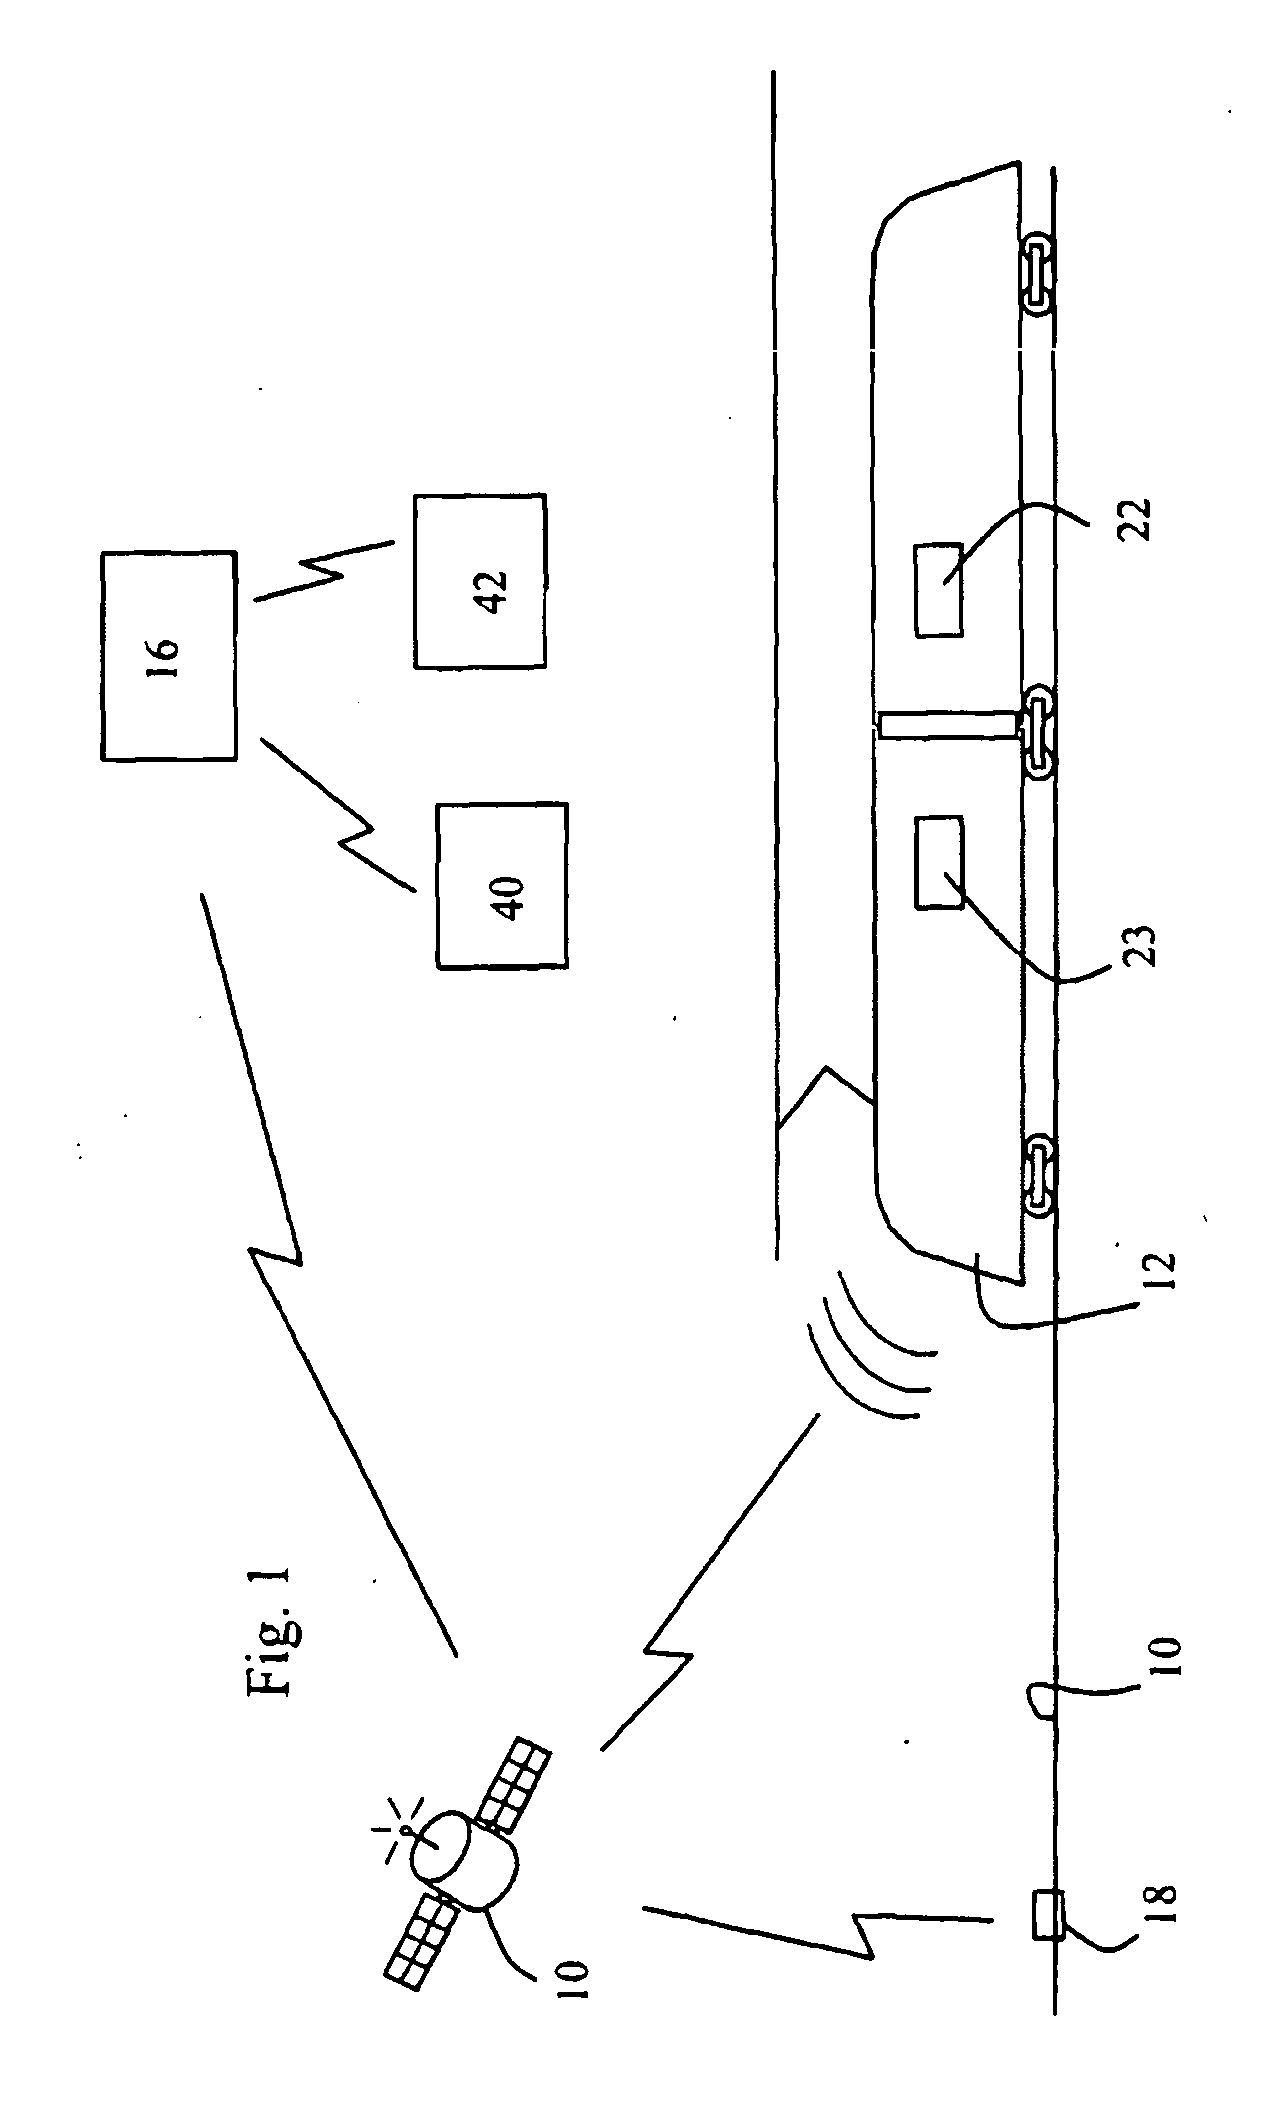 Diagnostic system and method for monitoring a rail system